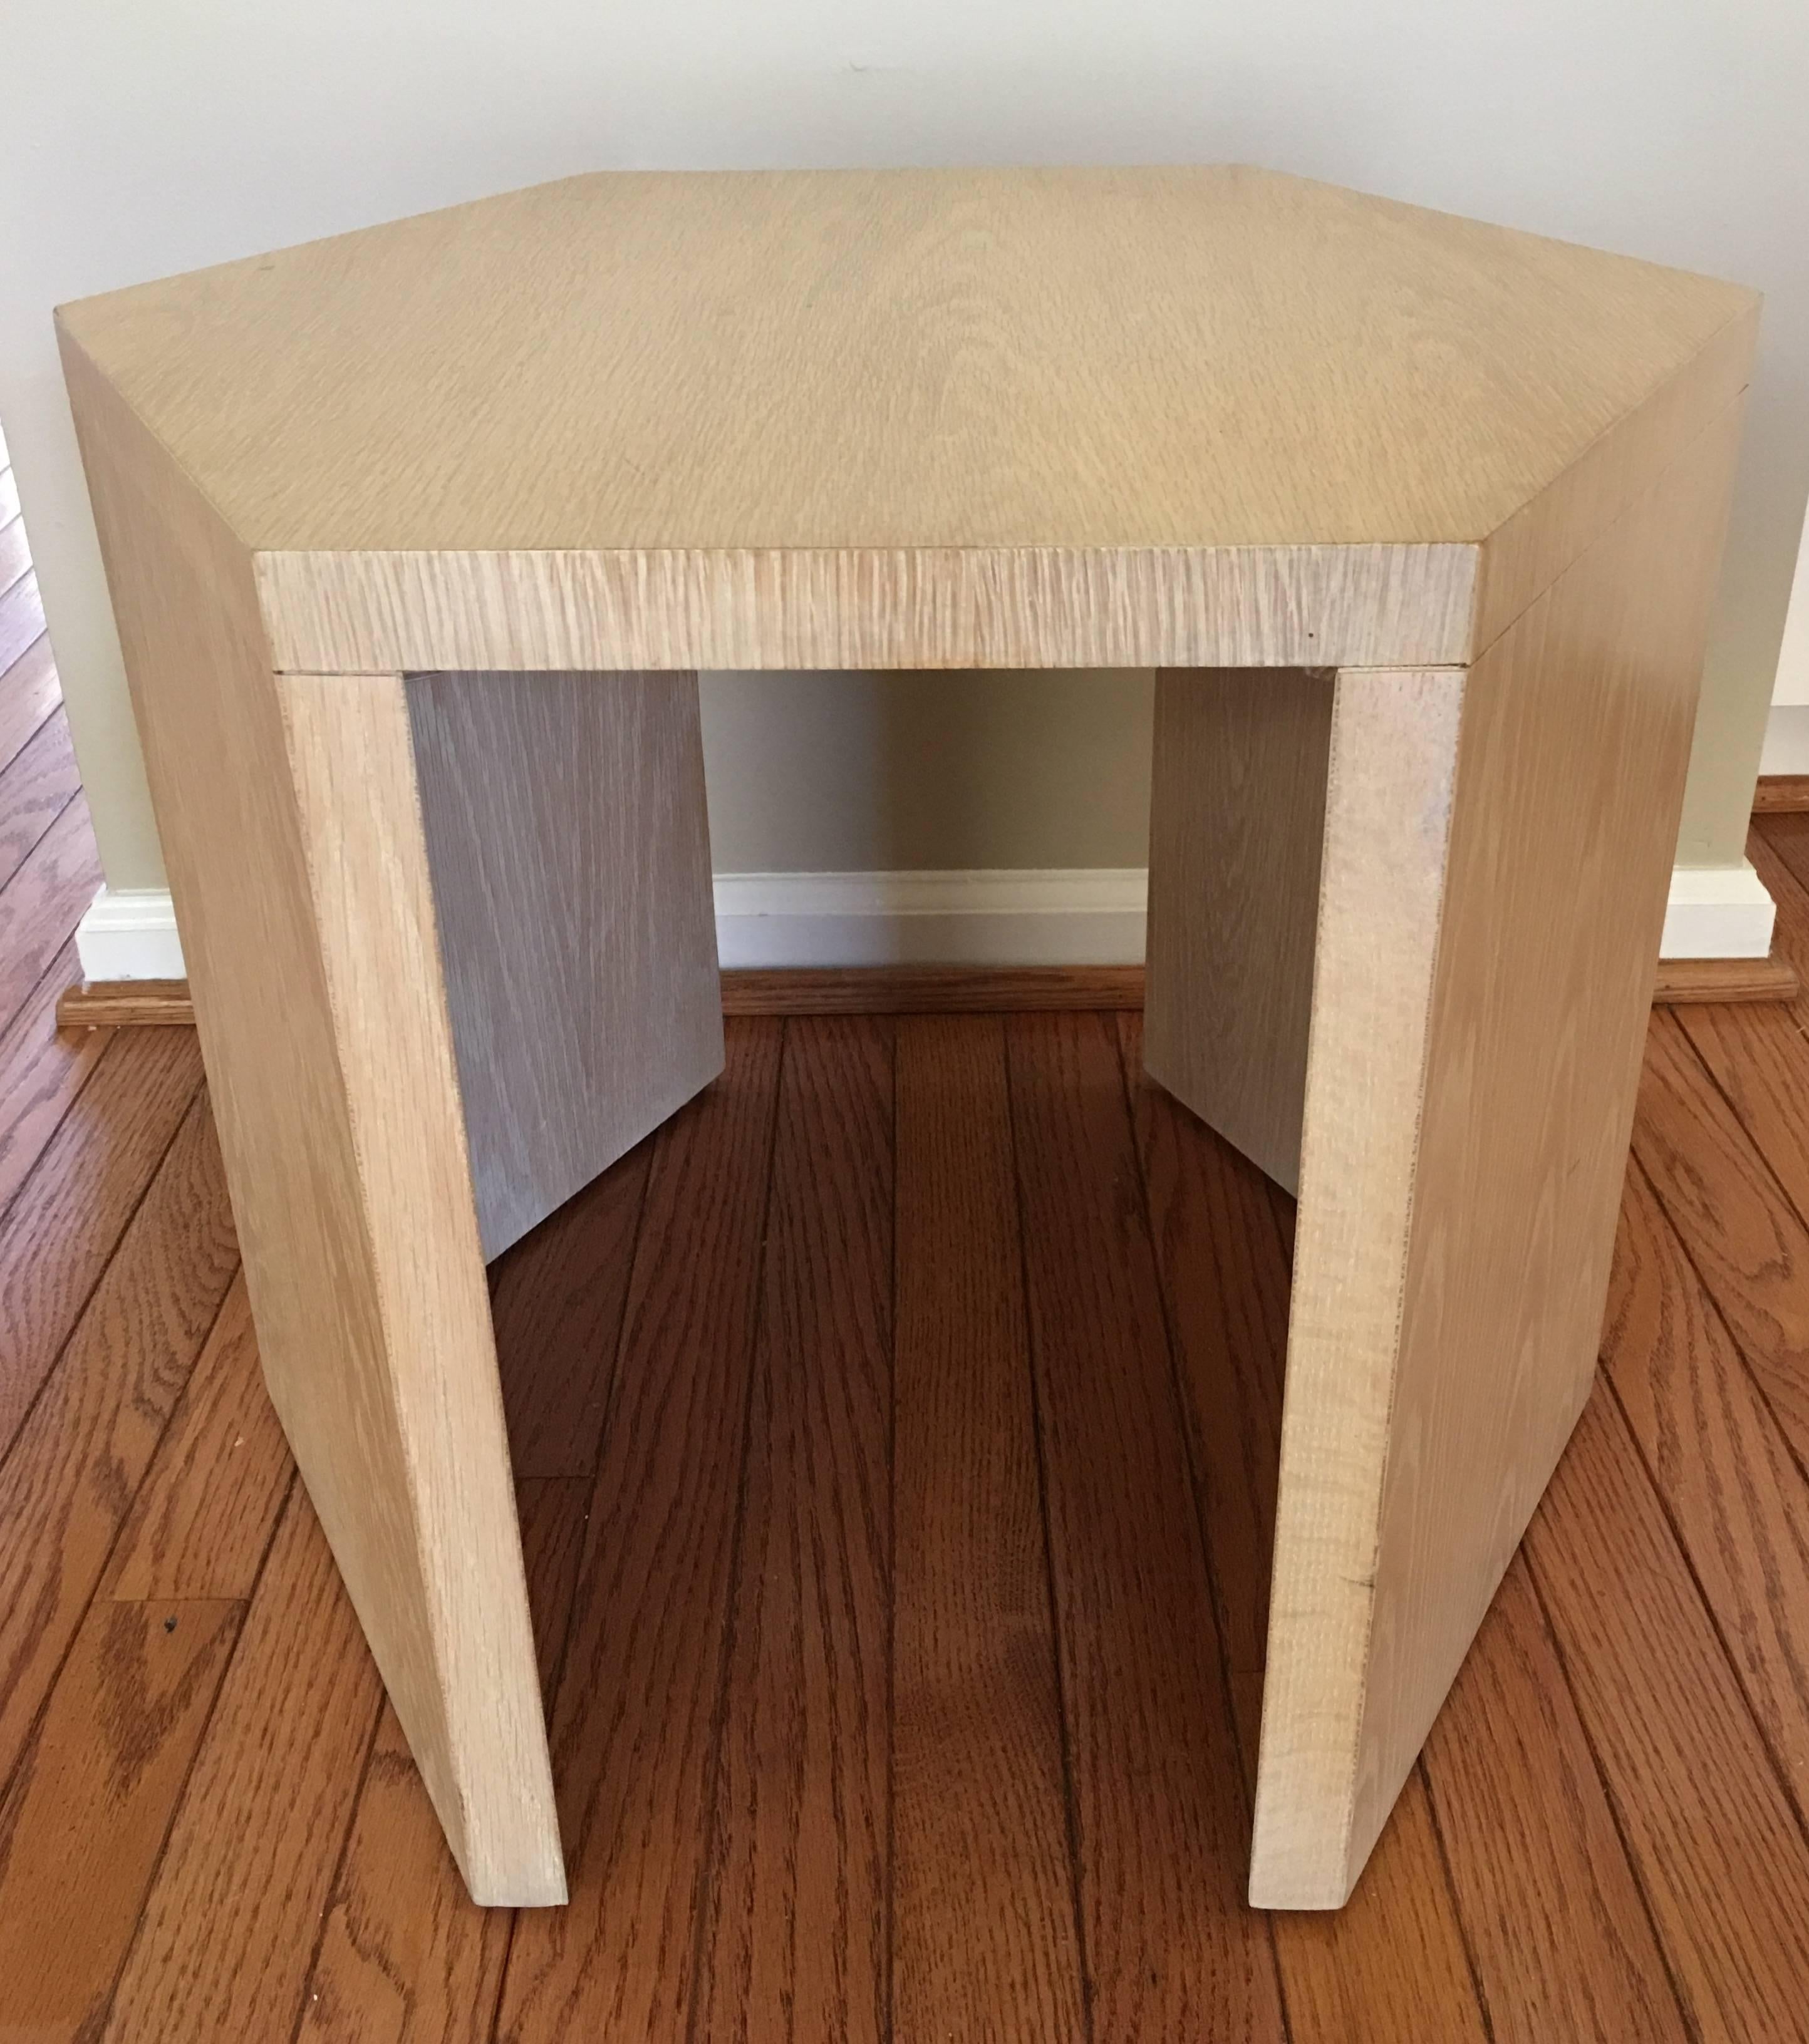 Solid oak sculptural side table by Jay Spectre for Century Furniture. Hexagon shape with two open sides. Can be used as a small cocktail coffee table. Coordinating Eclipse lounge chair also available.